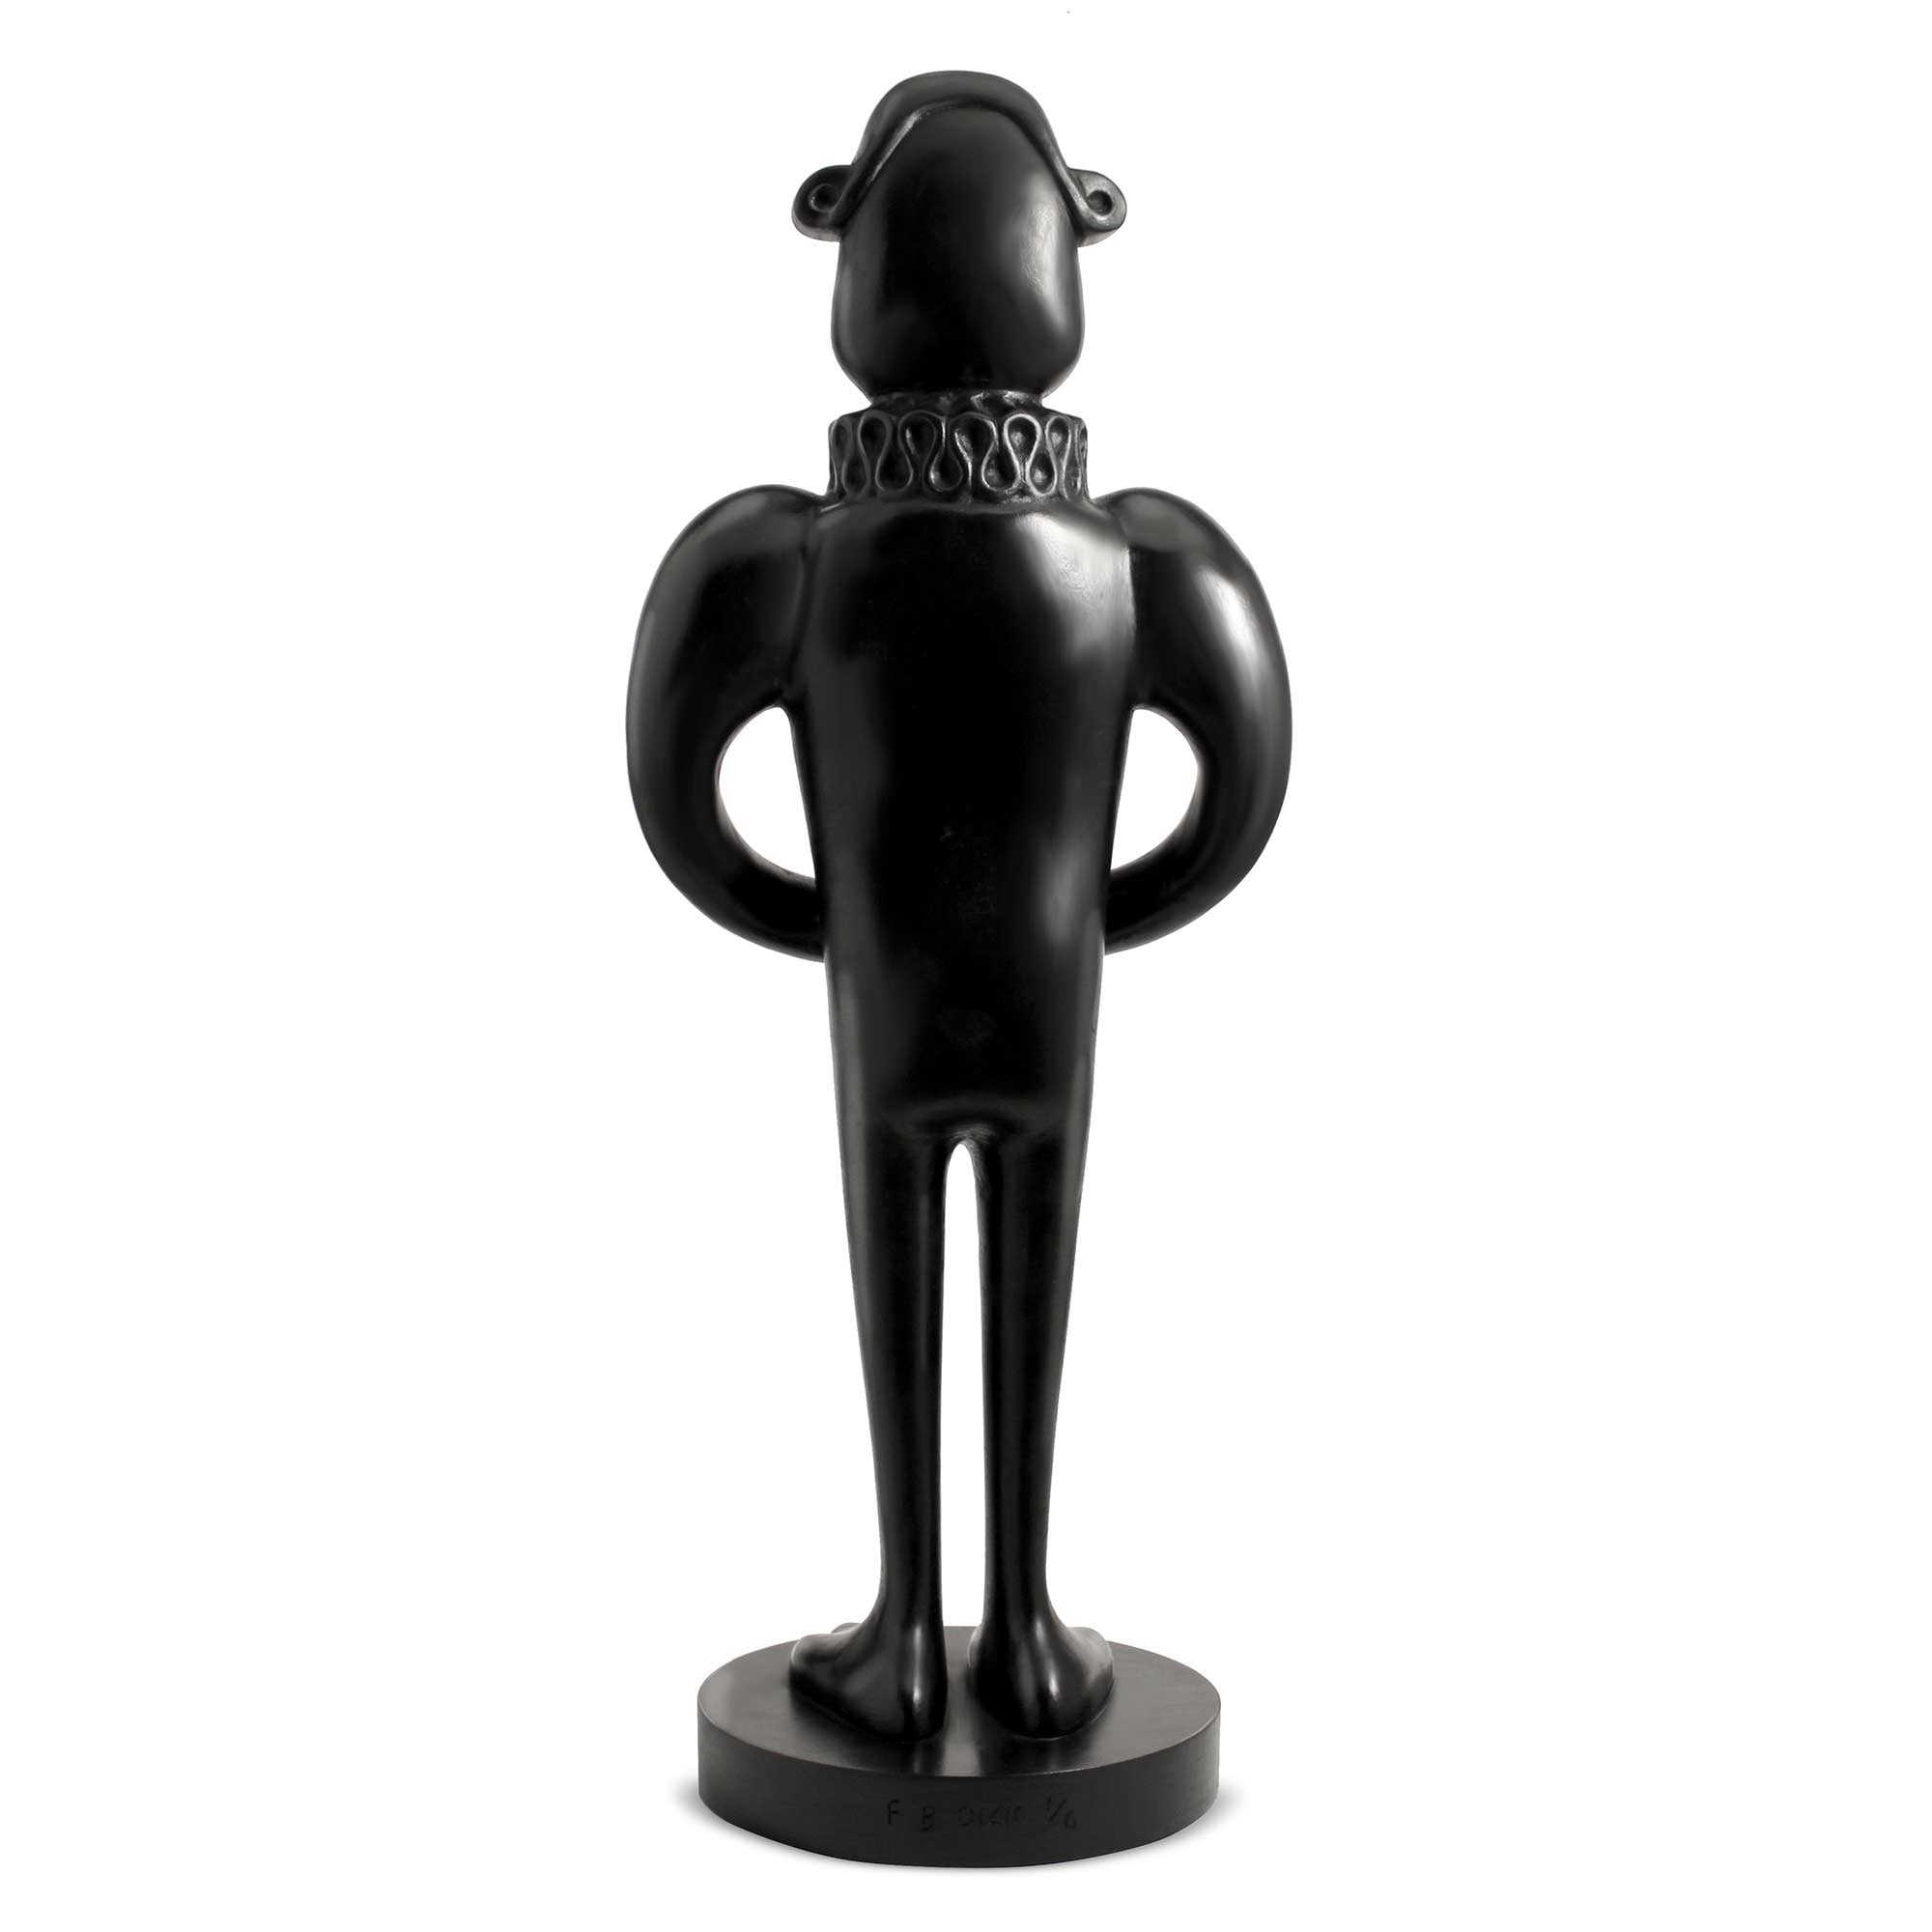 William, dog wood sculpture with black polished, by artist Ferdi B Dick, back view